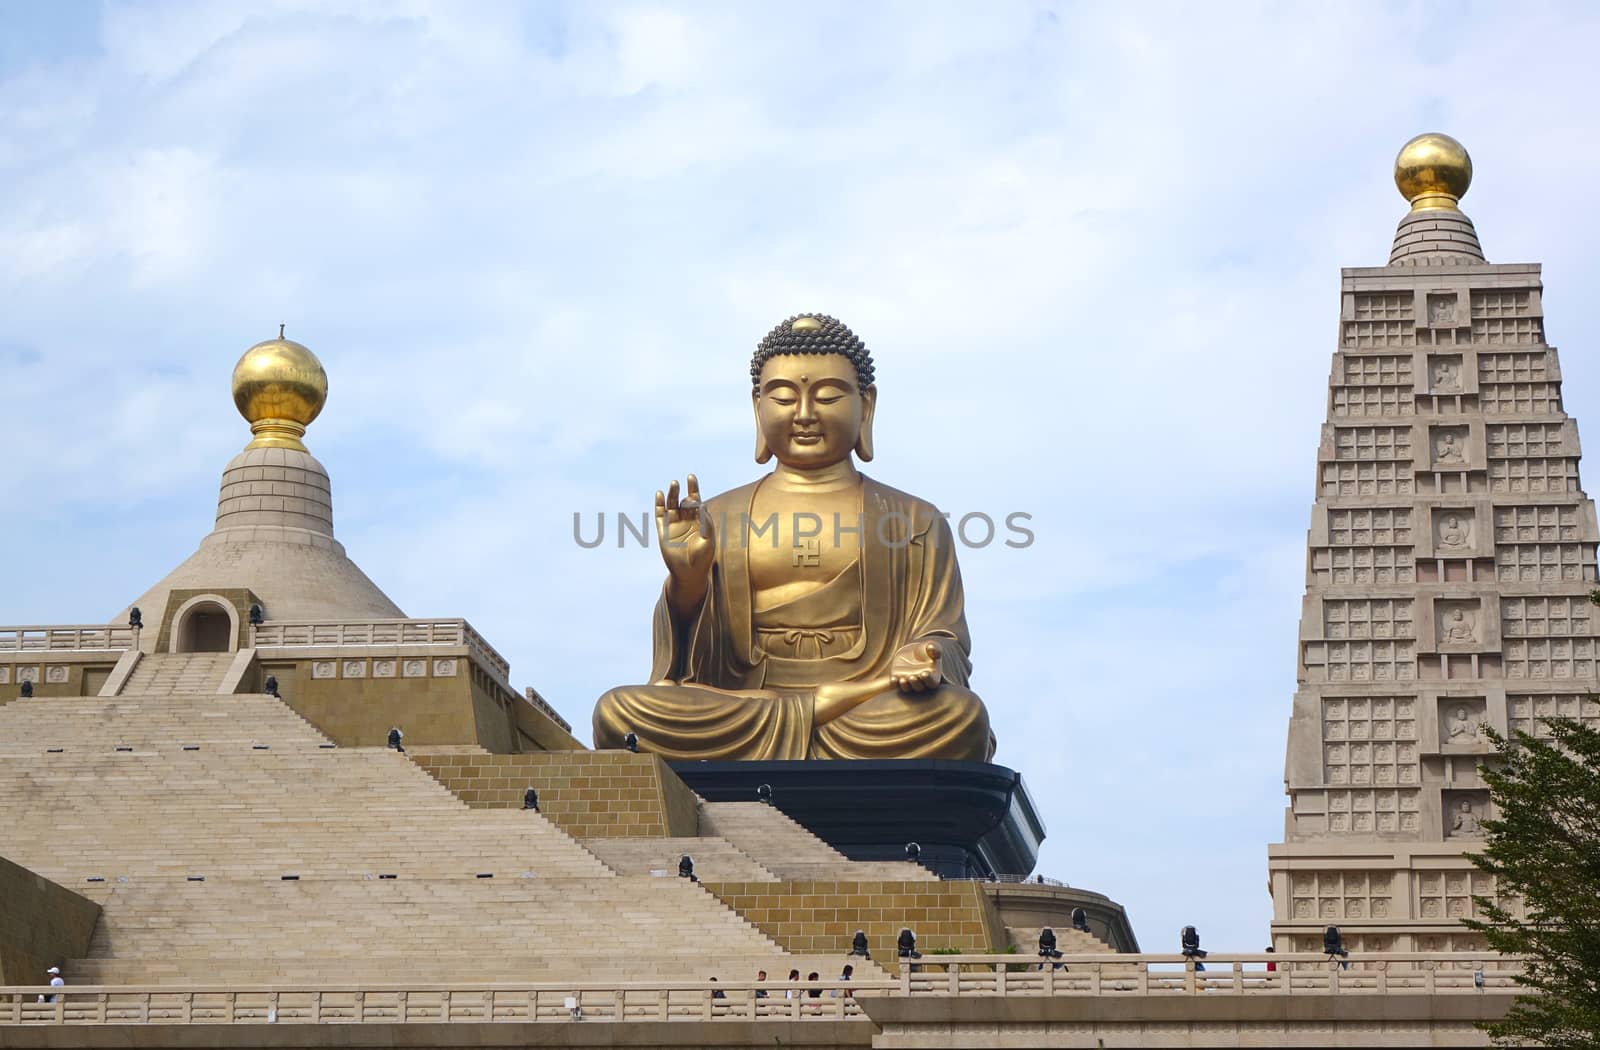 KAOHSIUNG, TAIWAN -- JANUARY 25, 2020: A giant Buddha statue overlooks the Fo Guang Shan Buddhist complex.
